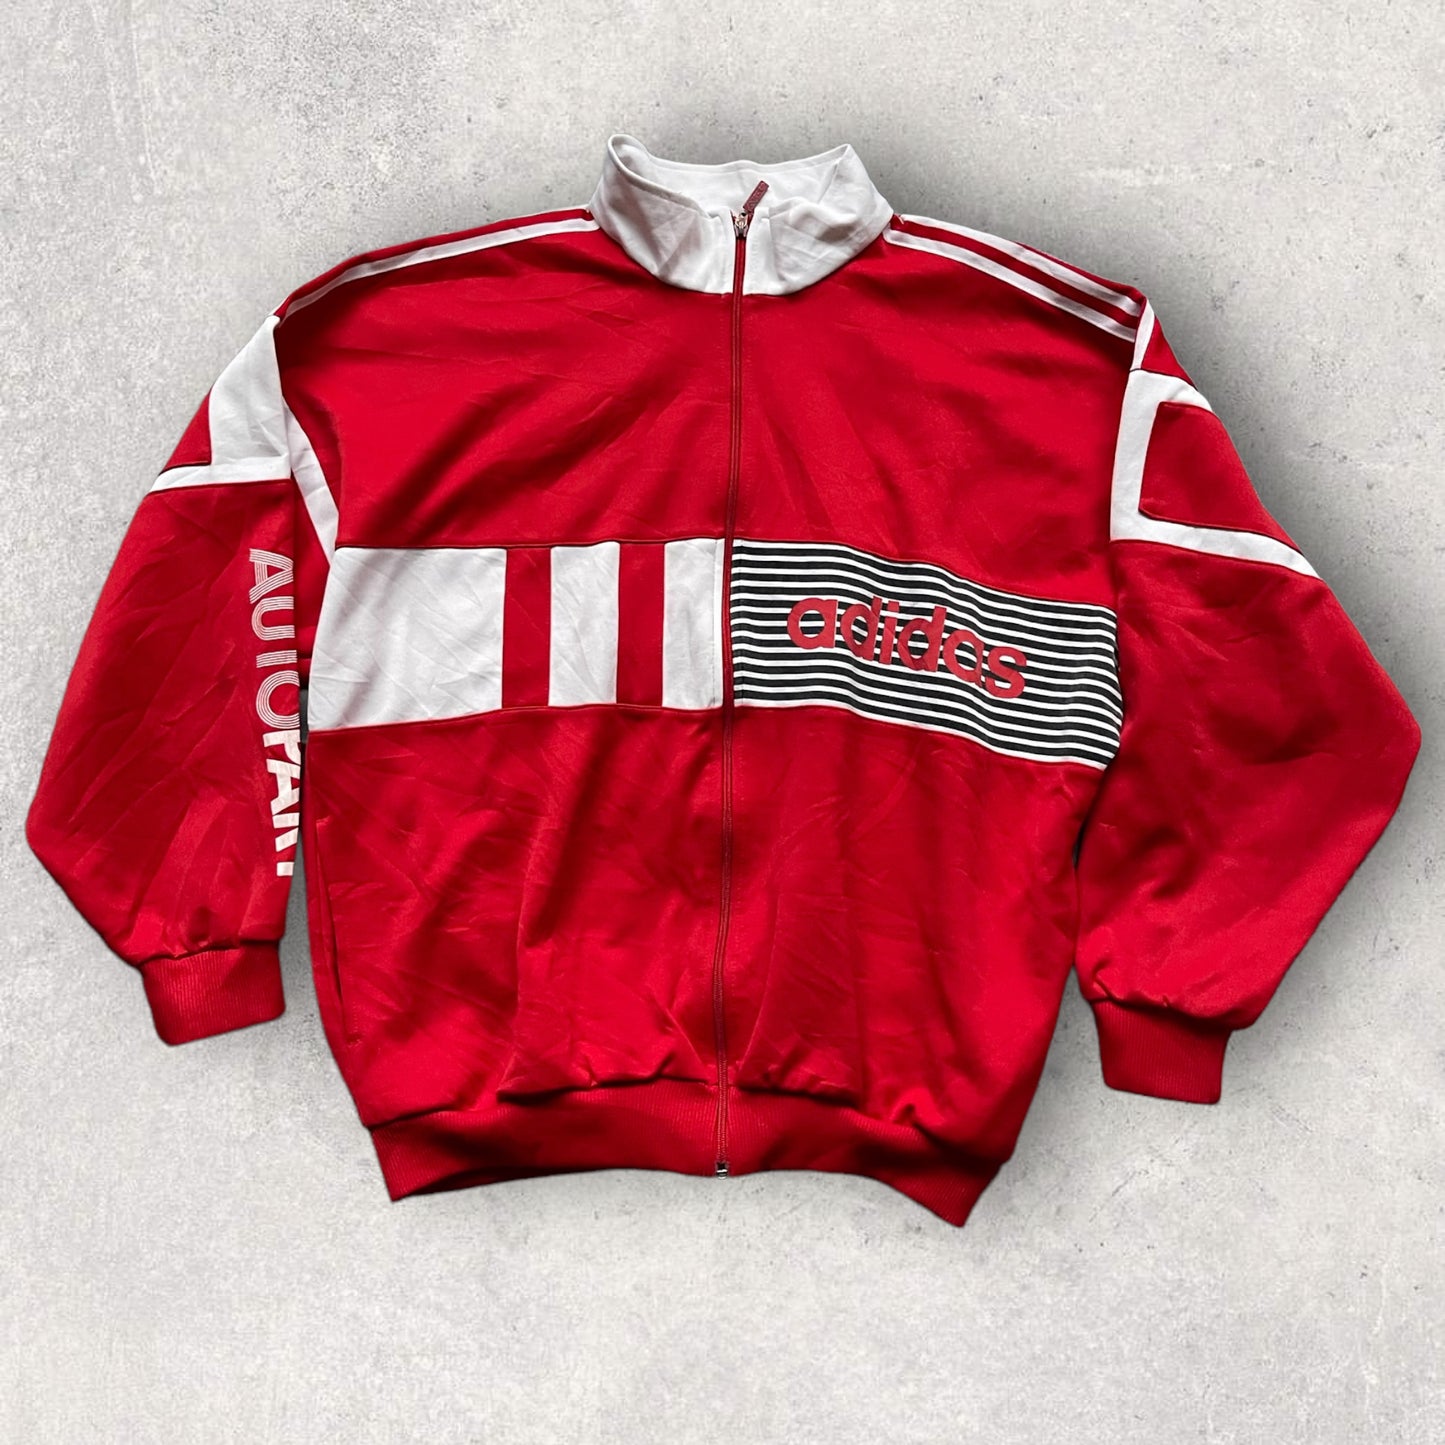 Adidas Vintage Tracksuit Top Full Zip Retro Red L Size T_11